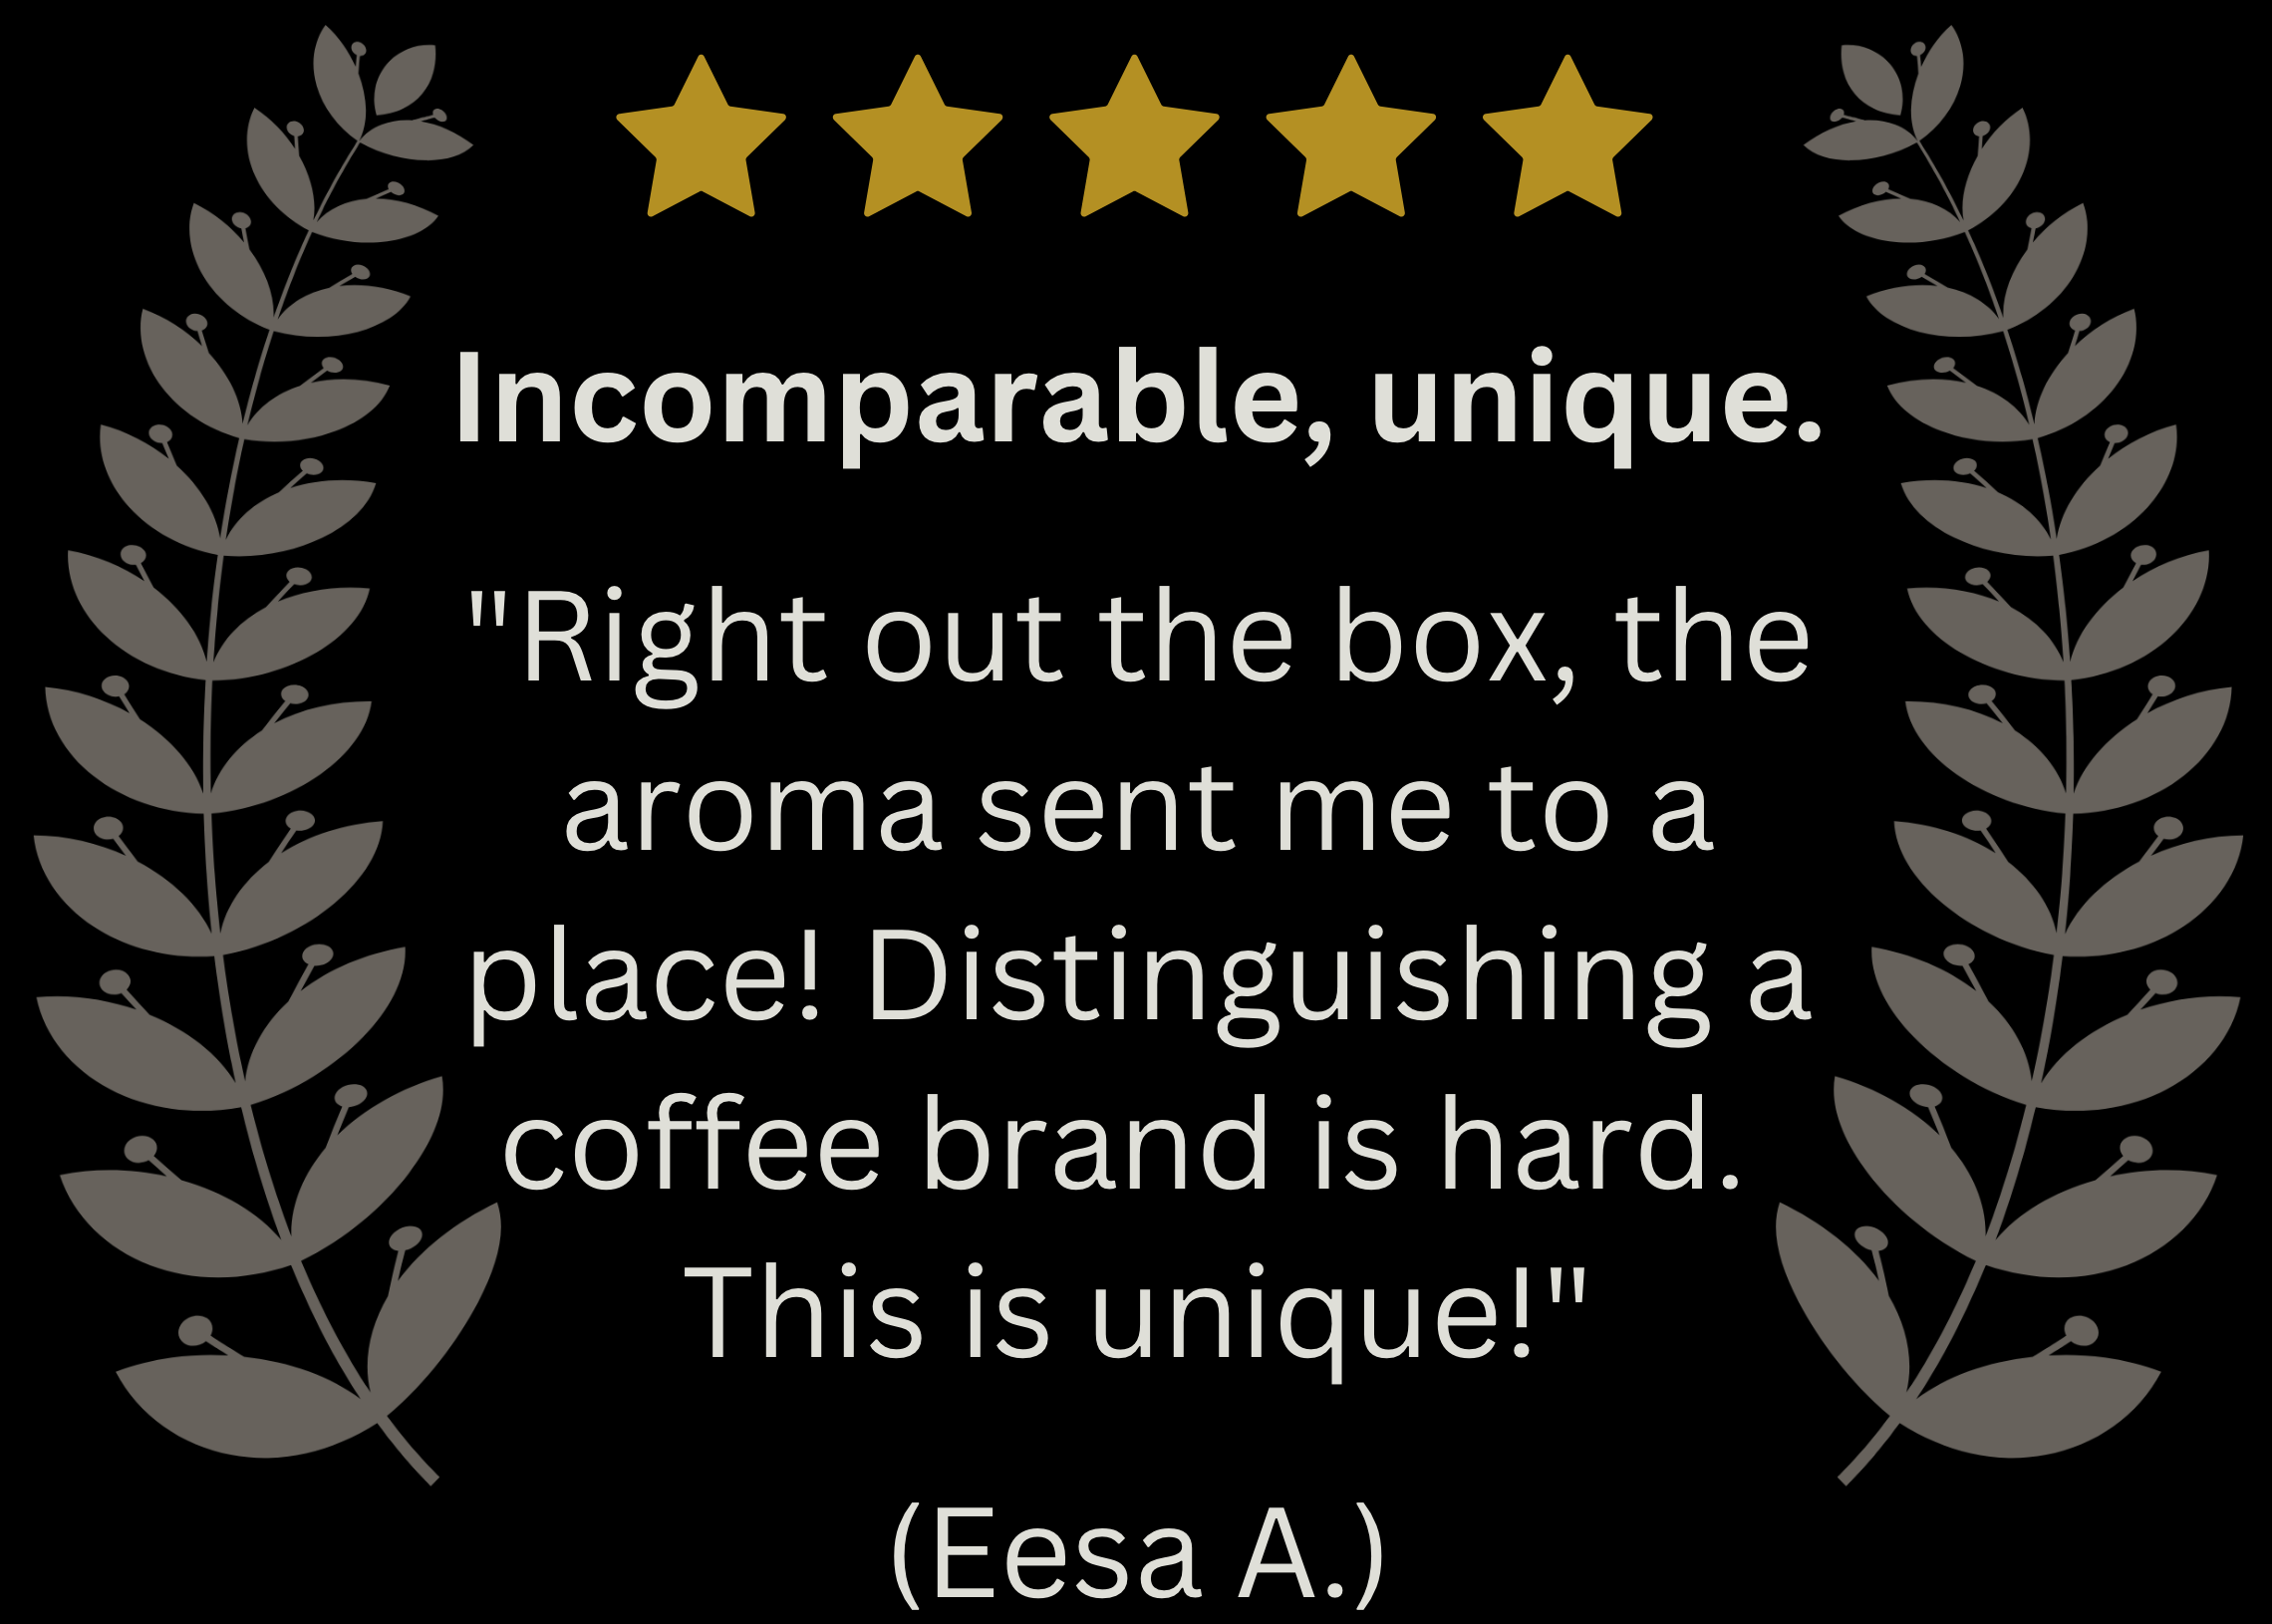 5-star review from Eesa A. stating, "Incomparable, unique. Right out the box, the aroma sent me to a place! Distinguishing a coffee brand is hard. This is unique!"